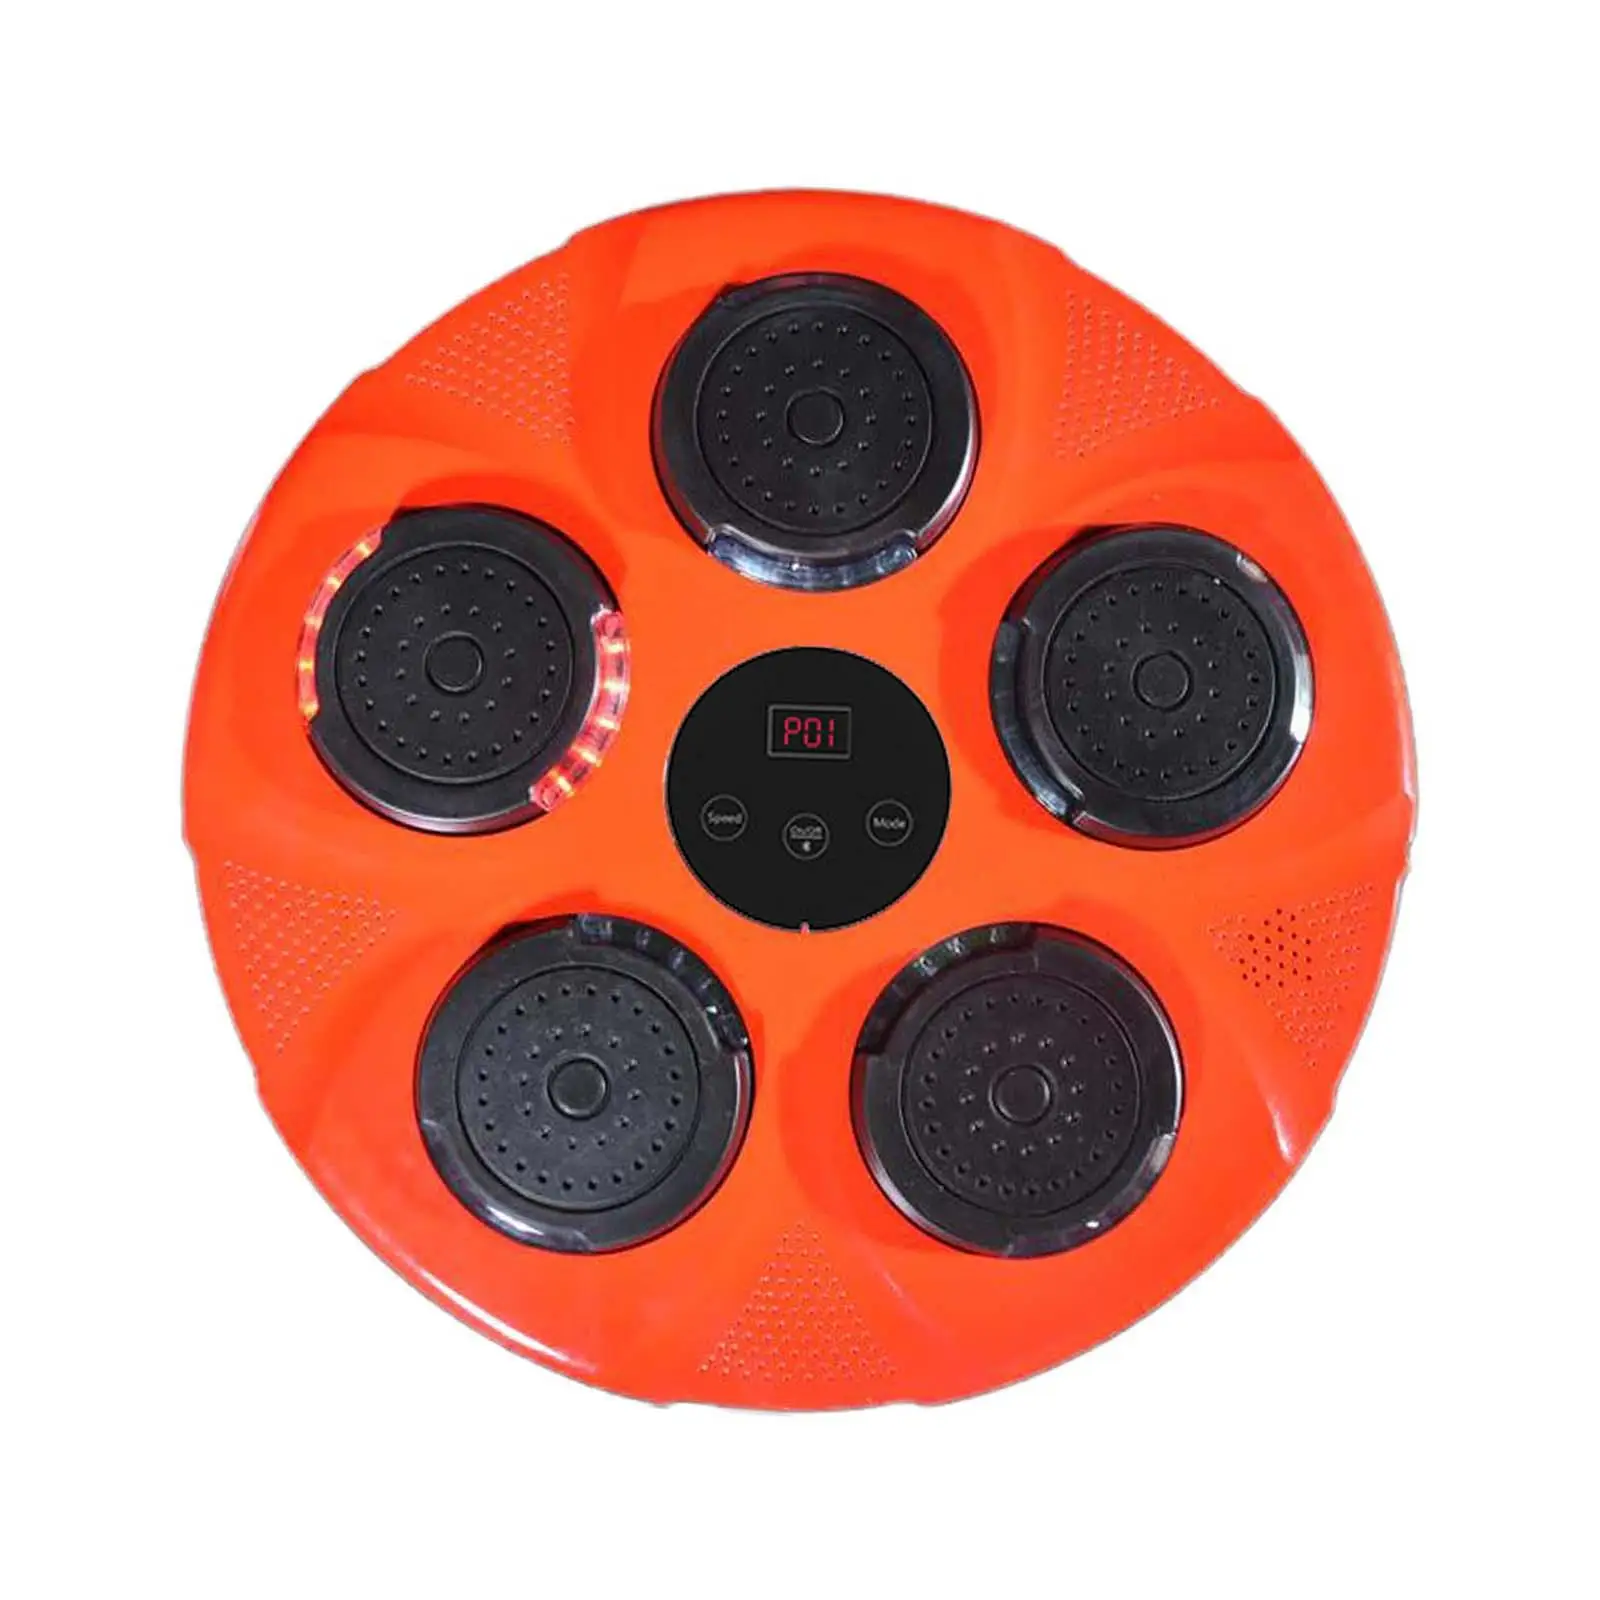 Boxing Machine Rechargeable Electronic Music Boxing Wall Target Reaction Target Punching Pad for Home Gym Exercise